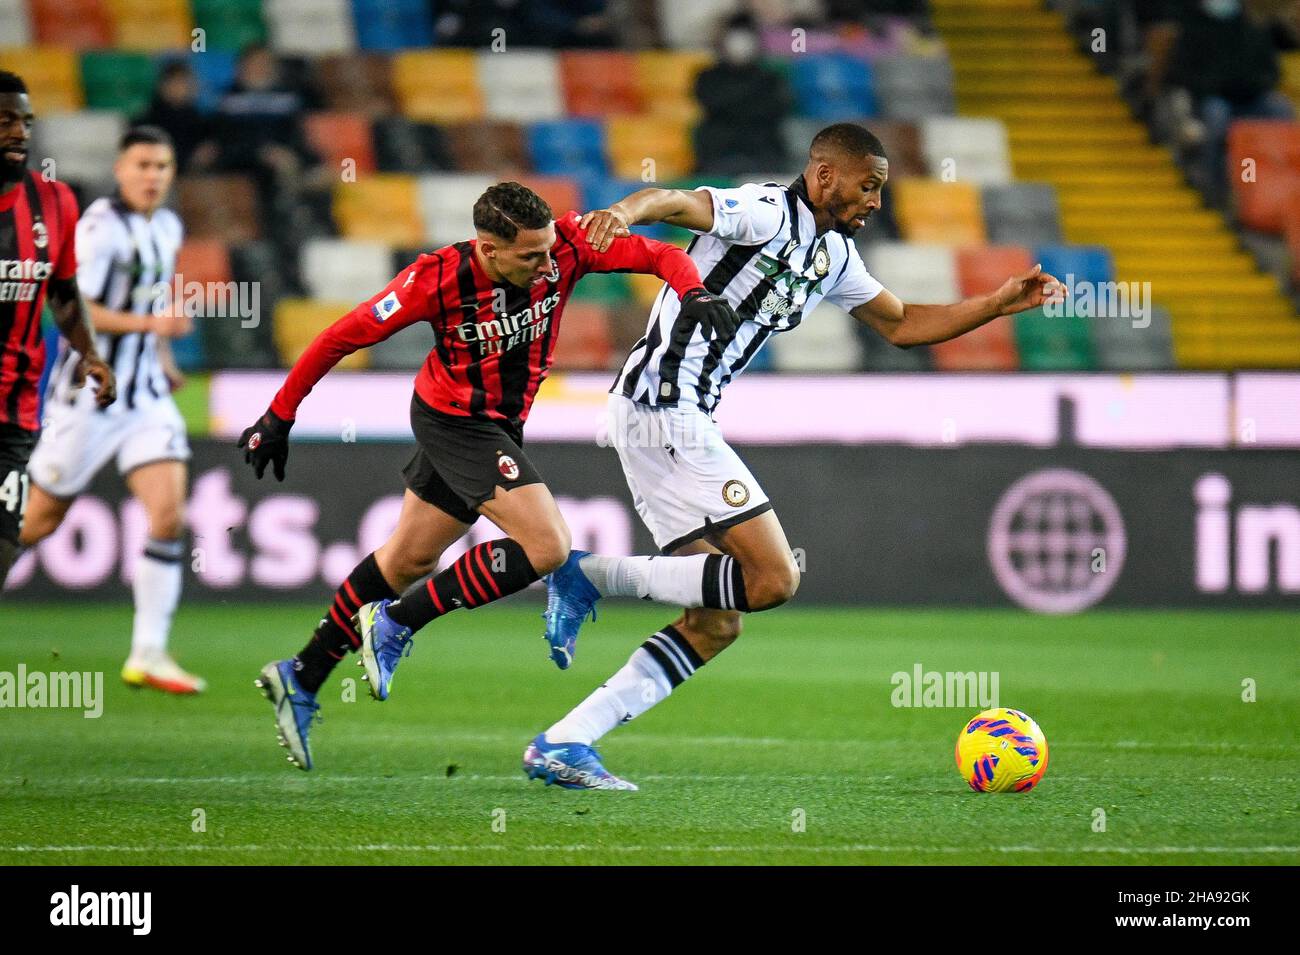 Friuli - Dacia Arena stadium, Udine, Italy, December 11, 2021, Udinese's Norberto Bercique Gomes Betuncal in action against Milan's Ismael Bennacer (Milan)  during  Udinese Calcio vs AC Milan - italian soccer Serie A match Stock Photo